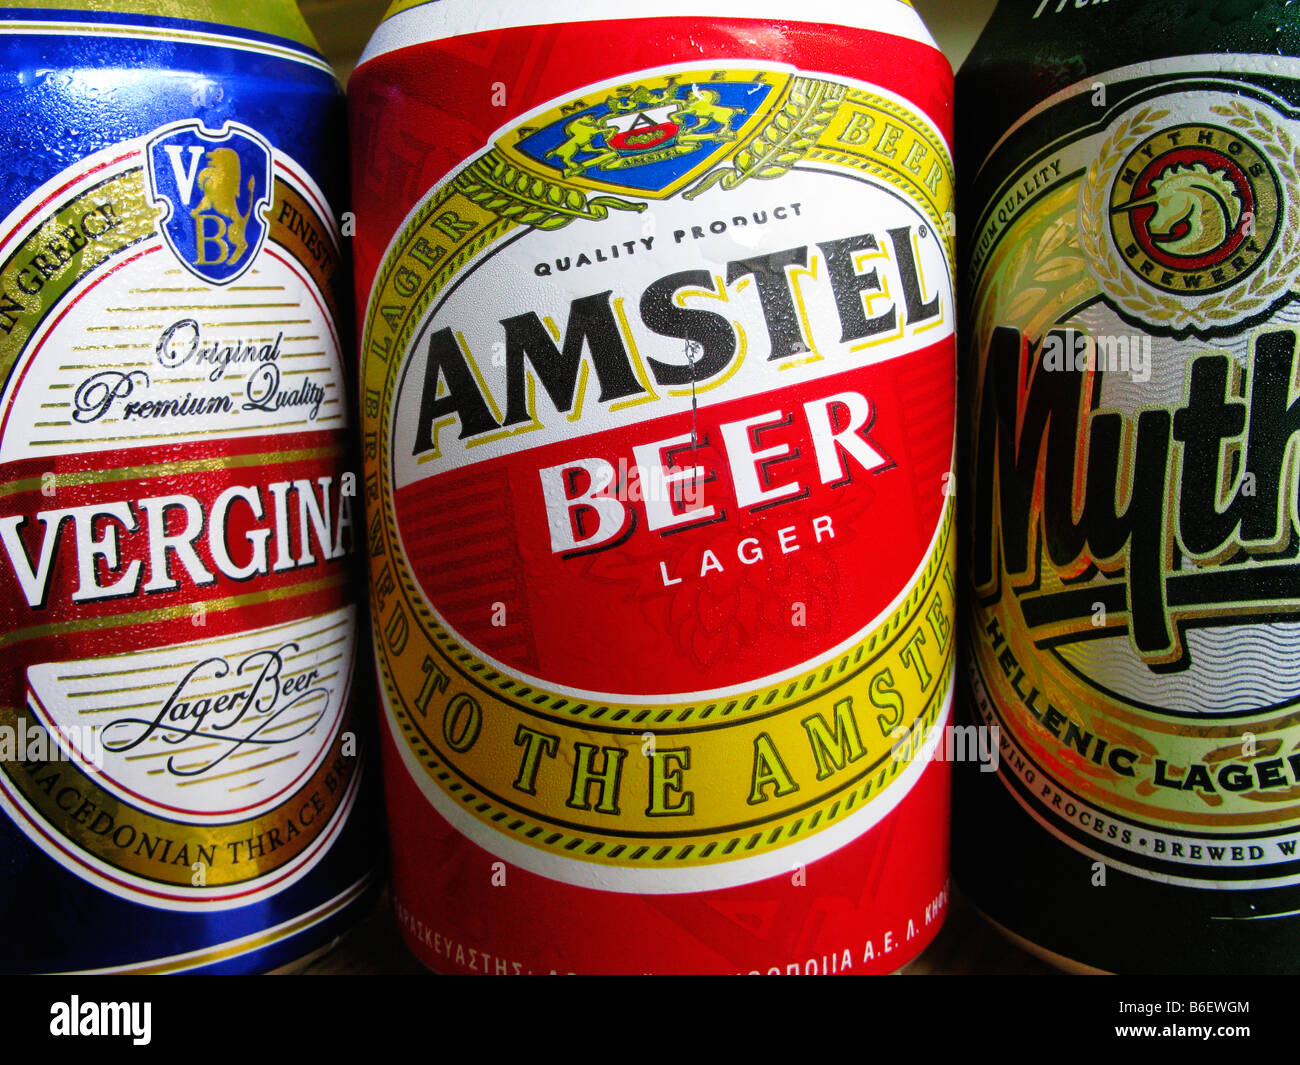 Greek Drinks. Cans of Amstel Mythos and Vergina Beer Stock Photo